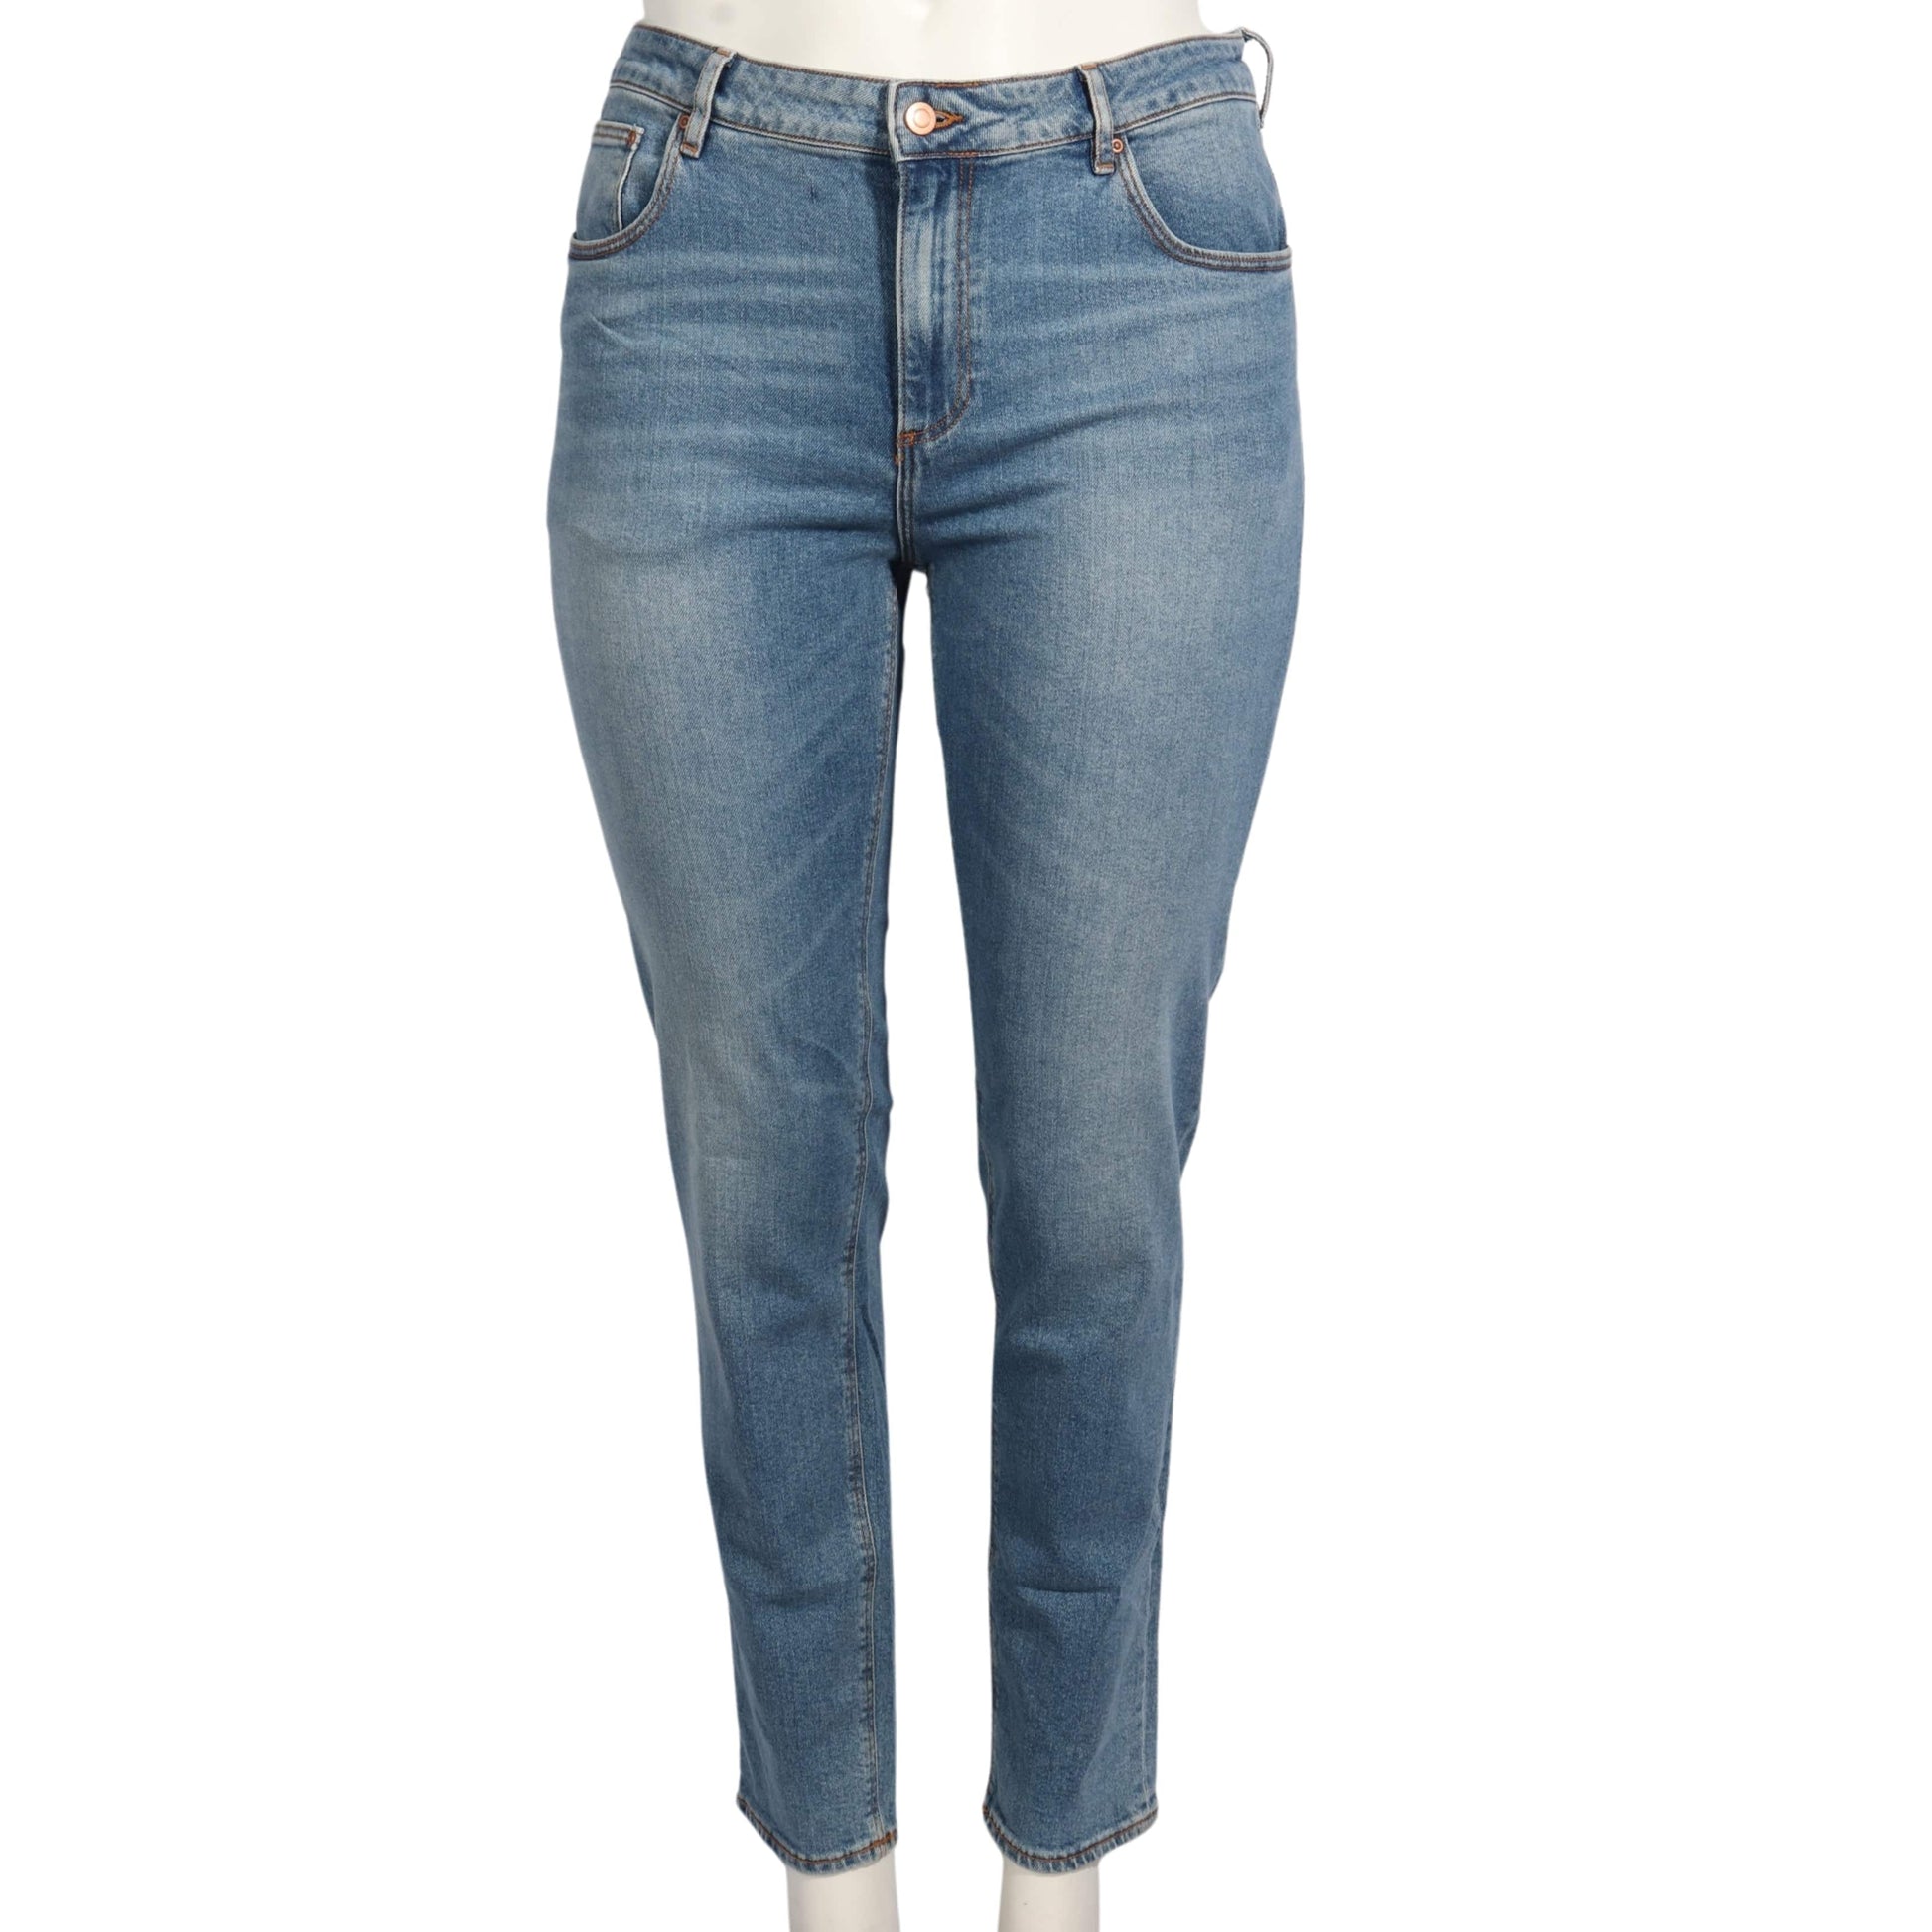 ASOS Womens Bottoms ASOS - Jeans Belt Loop With Pockets